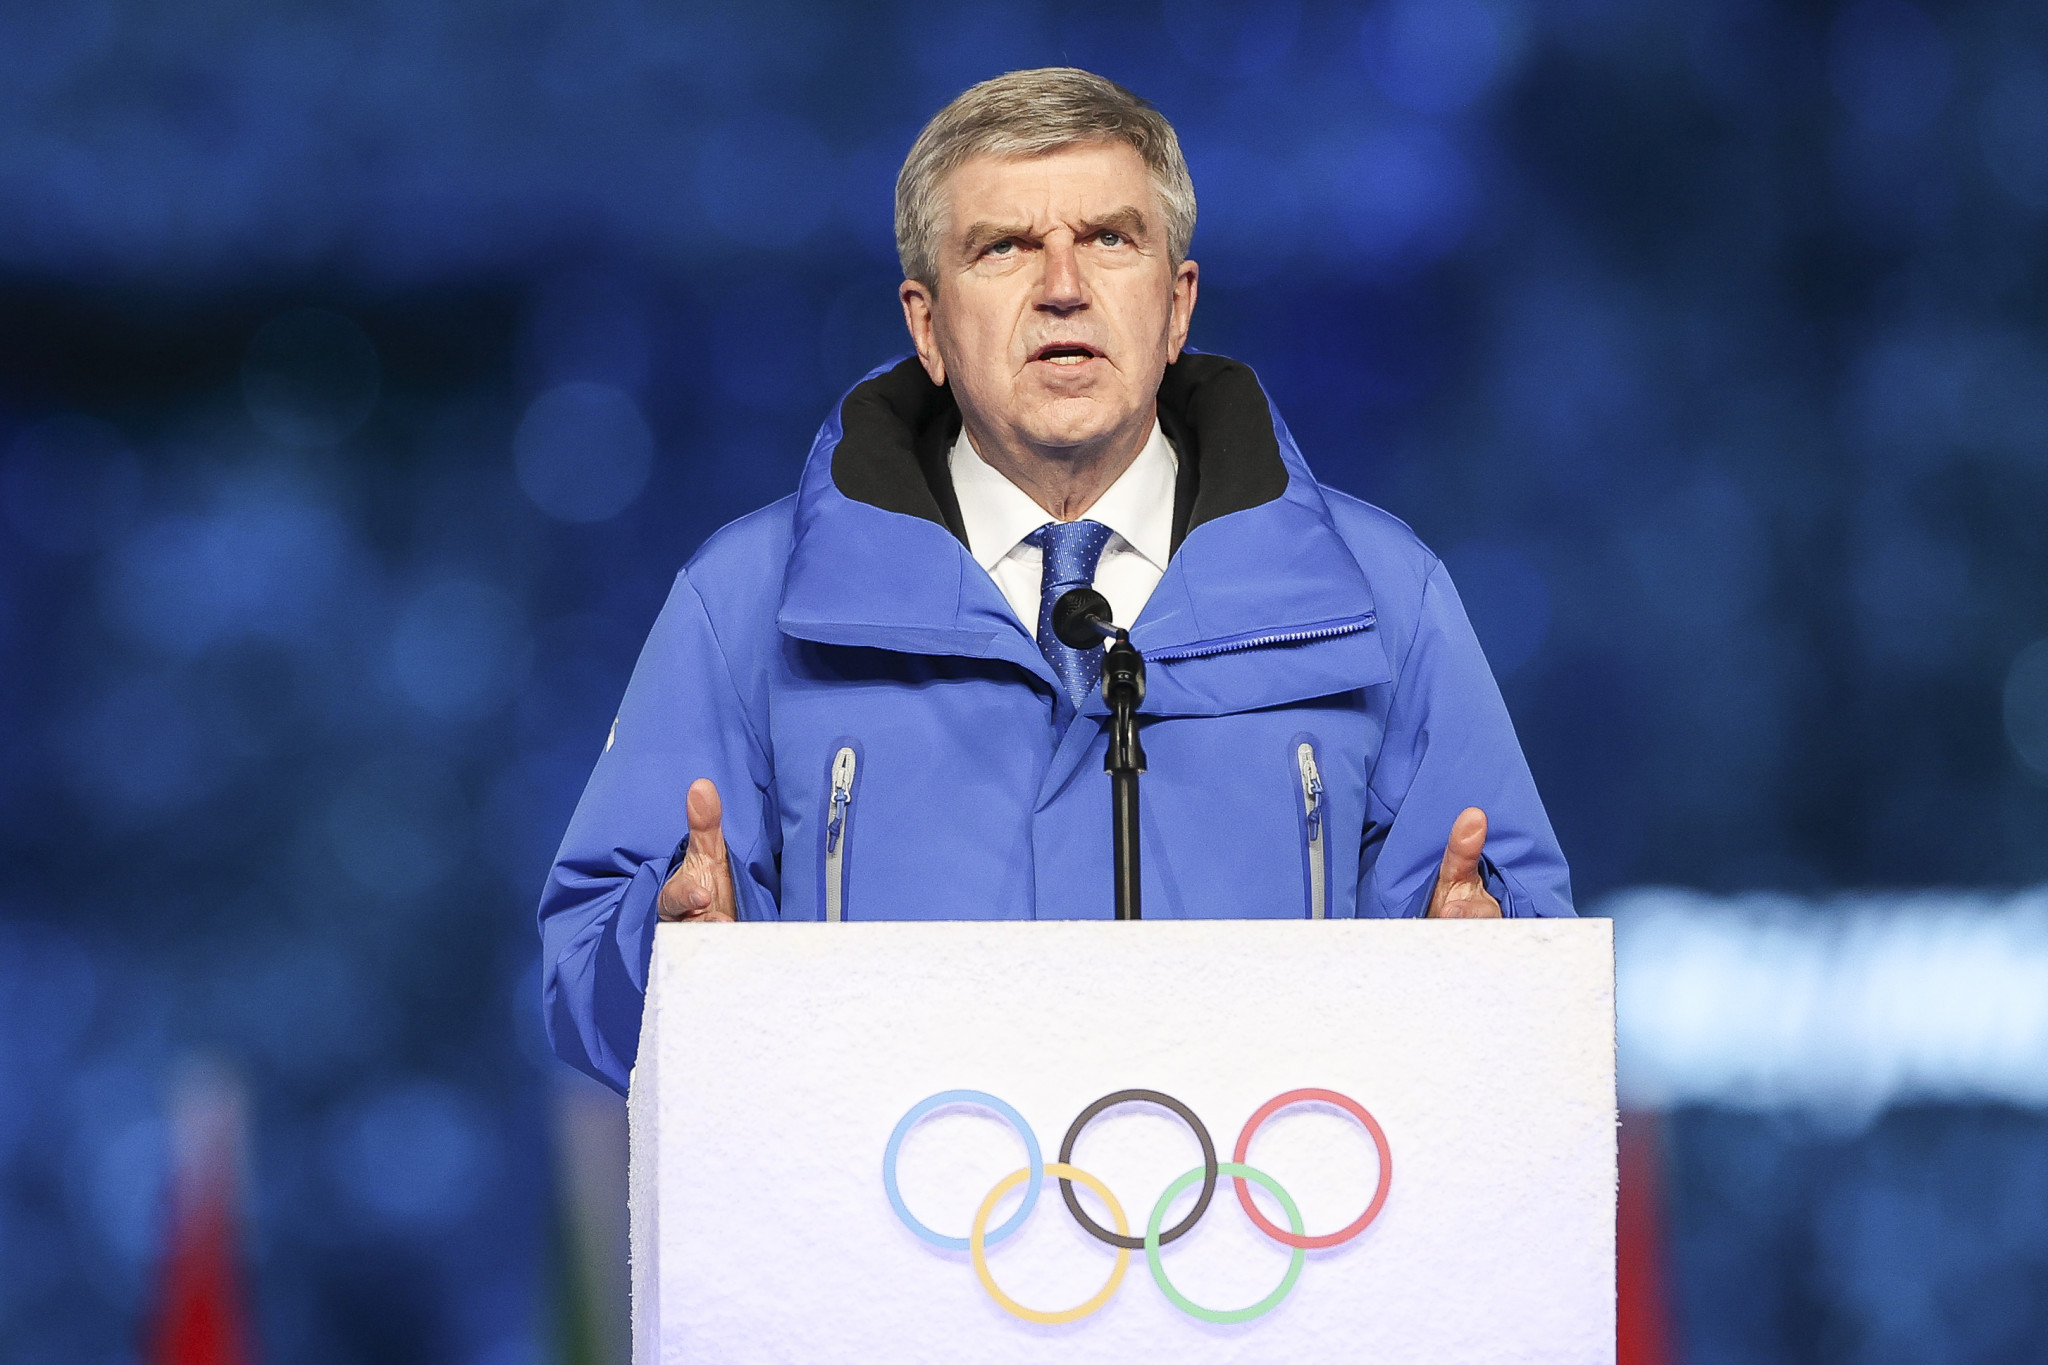 IOC President Thomas Bach is expected to attend the Birmingham 2022 World Games Opening Ceremony ©Getty Images